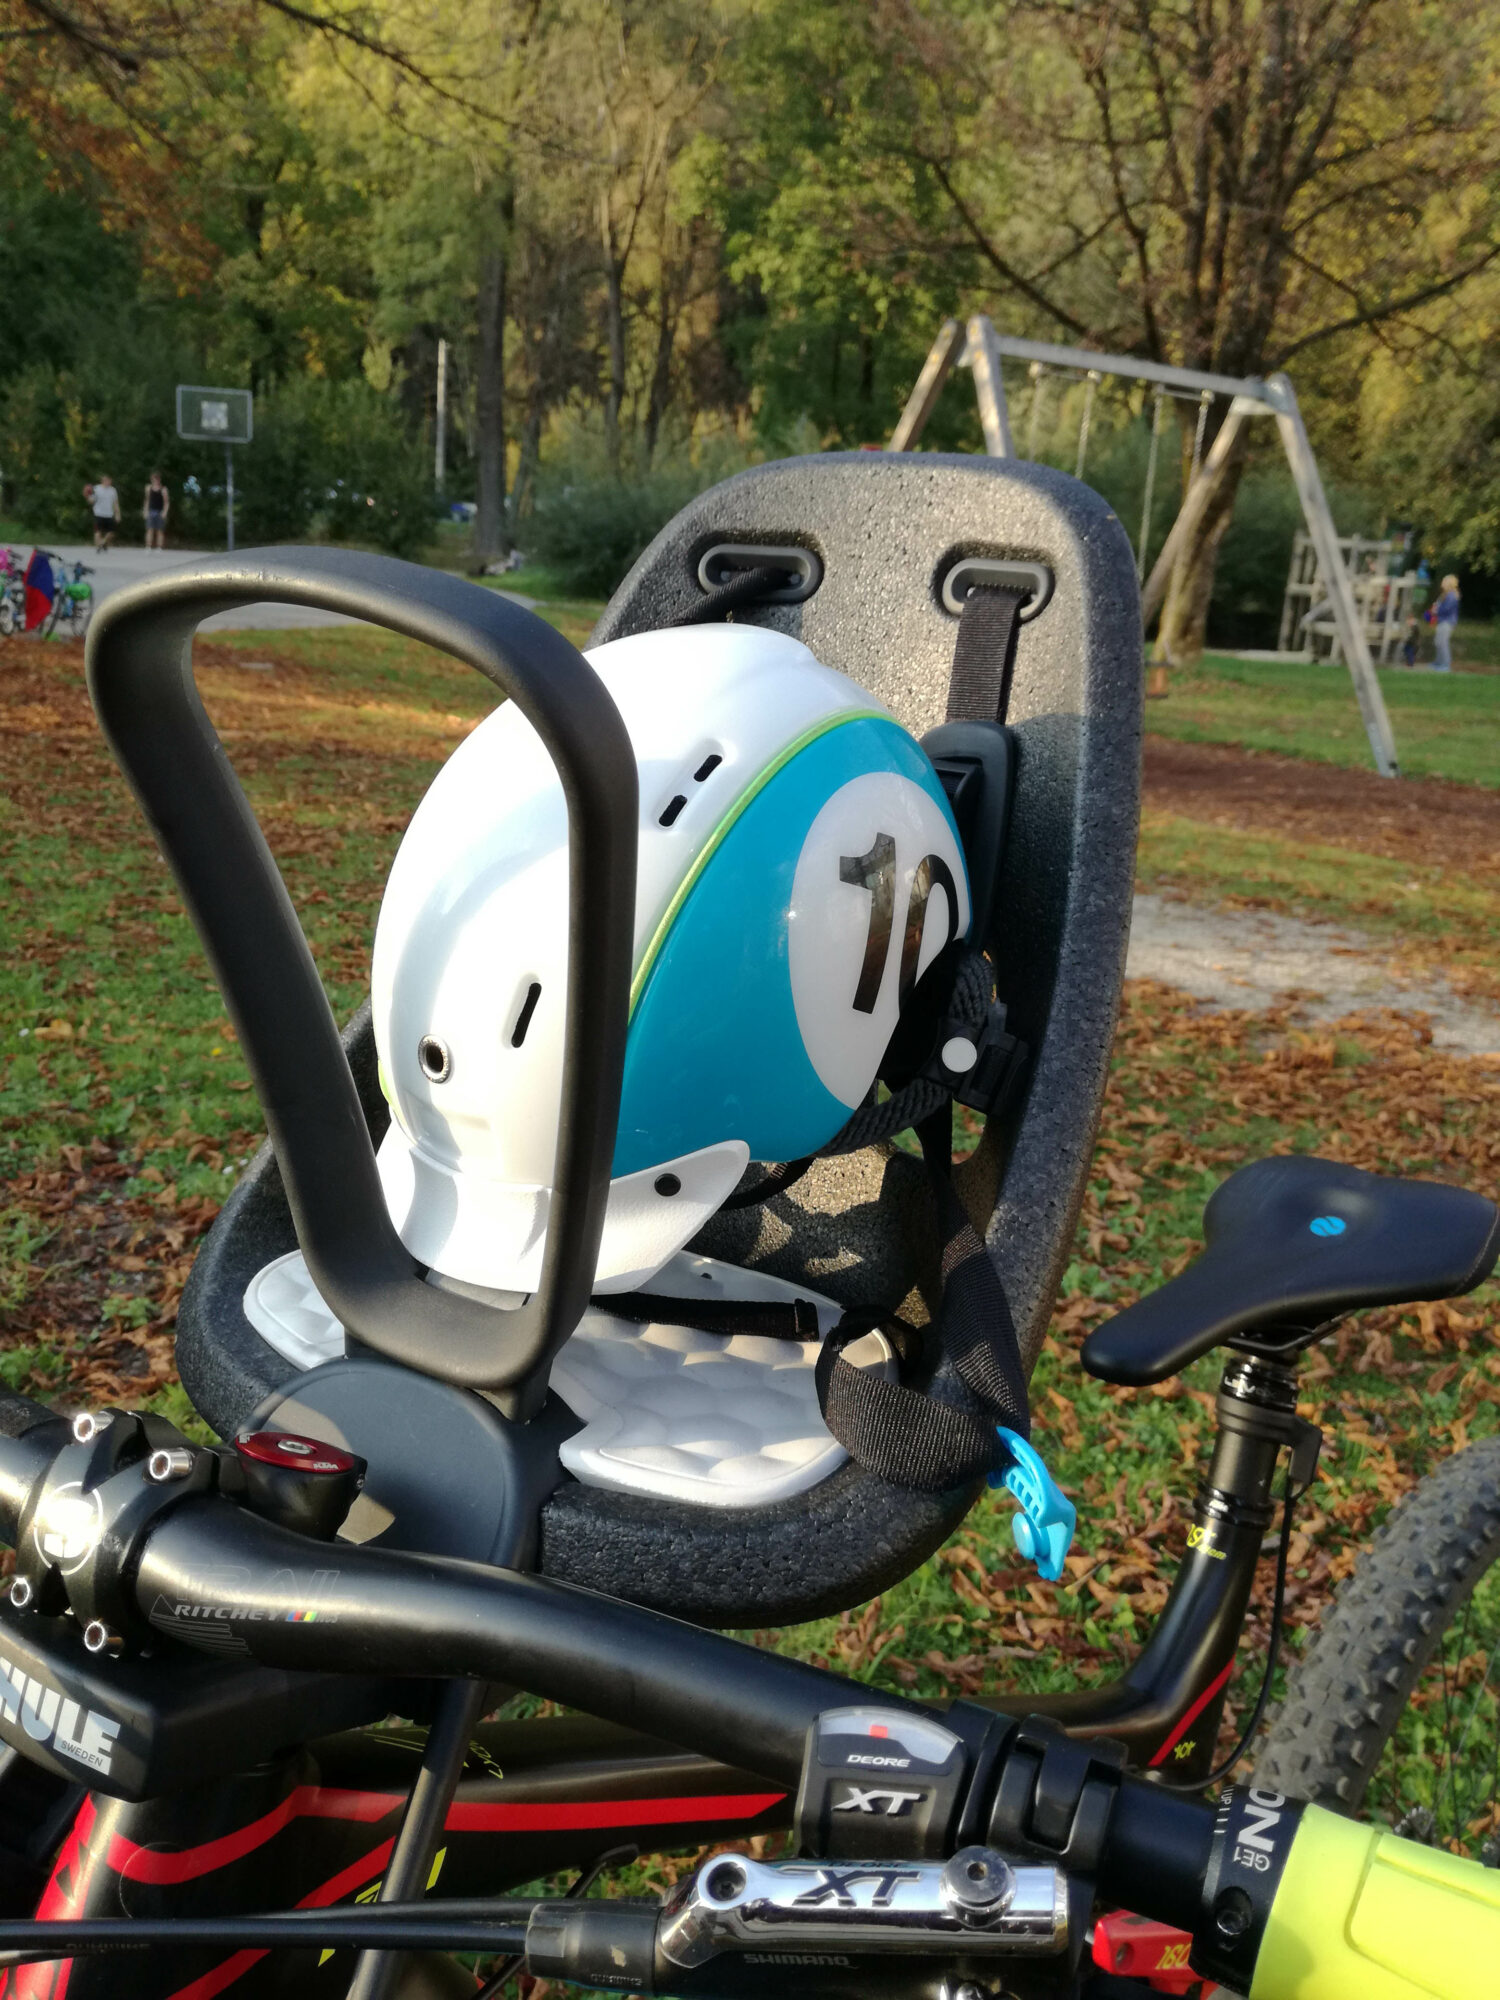 kloof cabine Schuldenaar How to mount the Thule Child Seat on the handlebars | Kids, Adventure & More